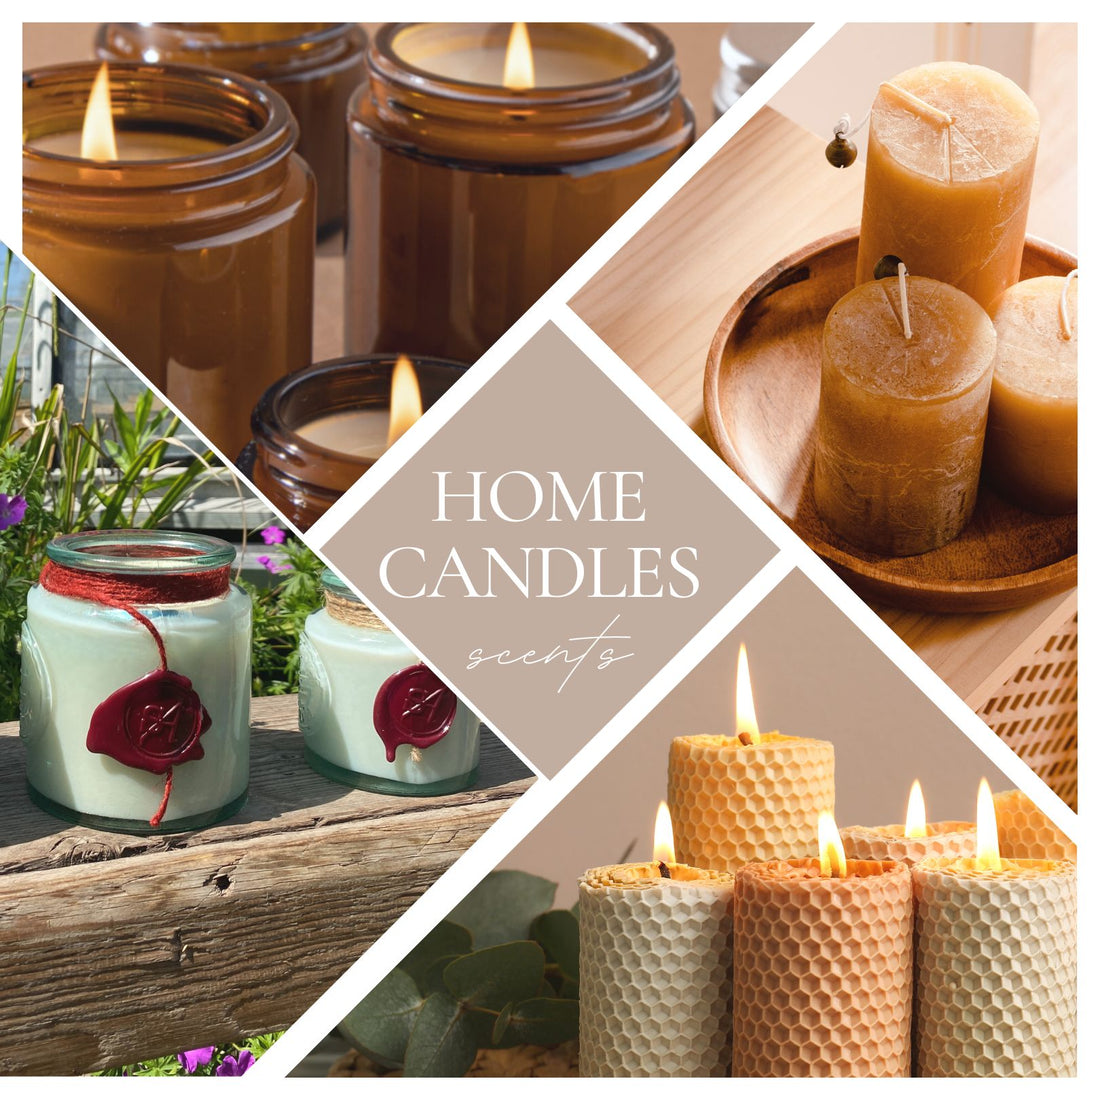 How to Choose the Right Scented Soy Candle for Your Home